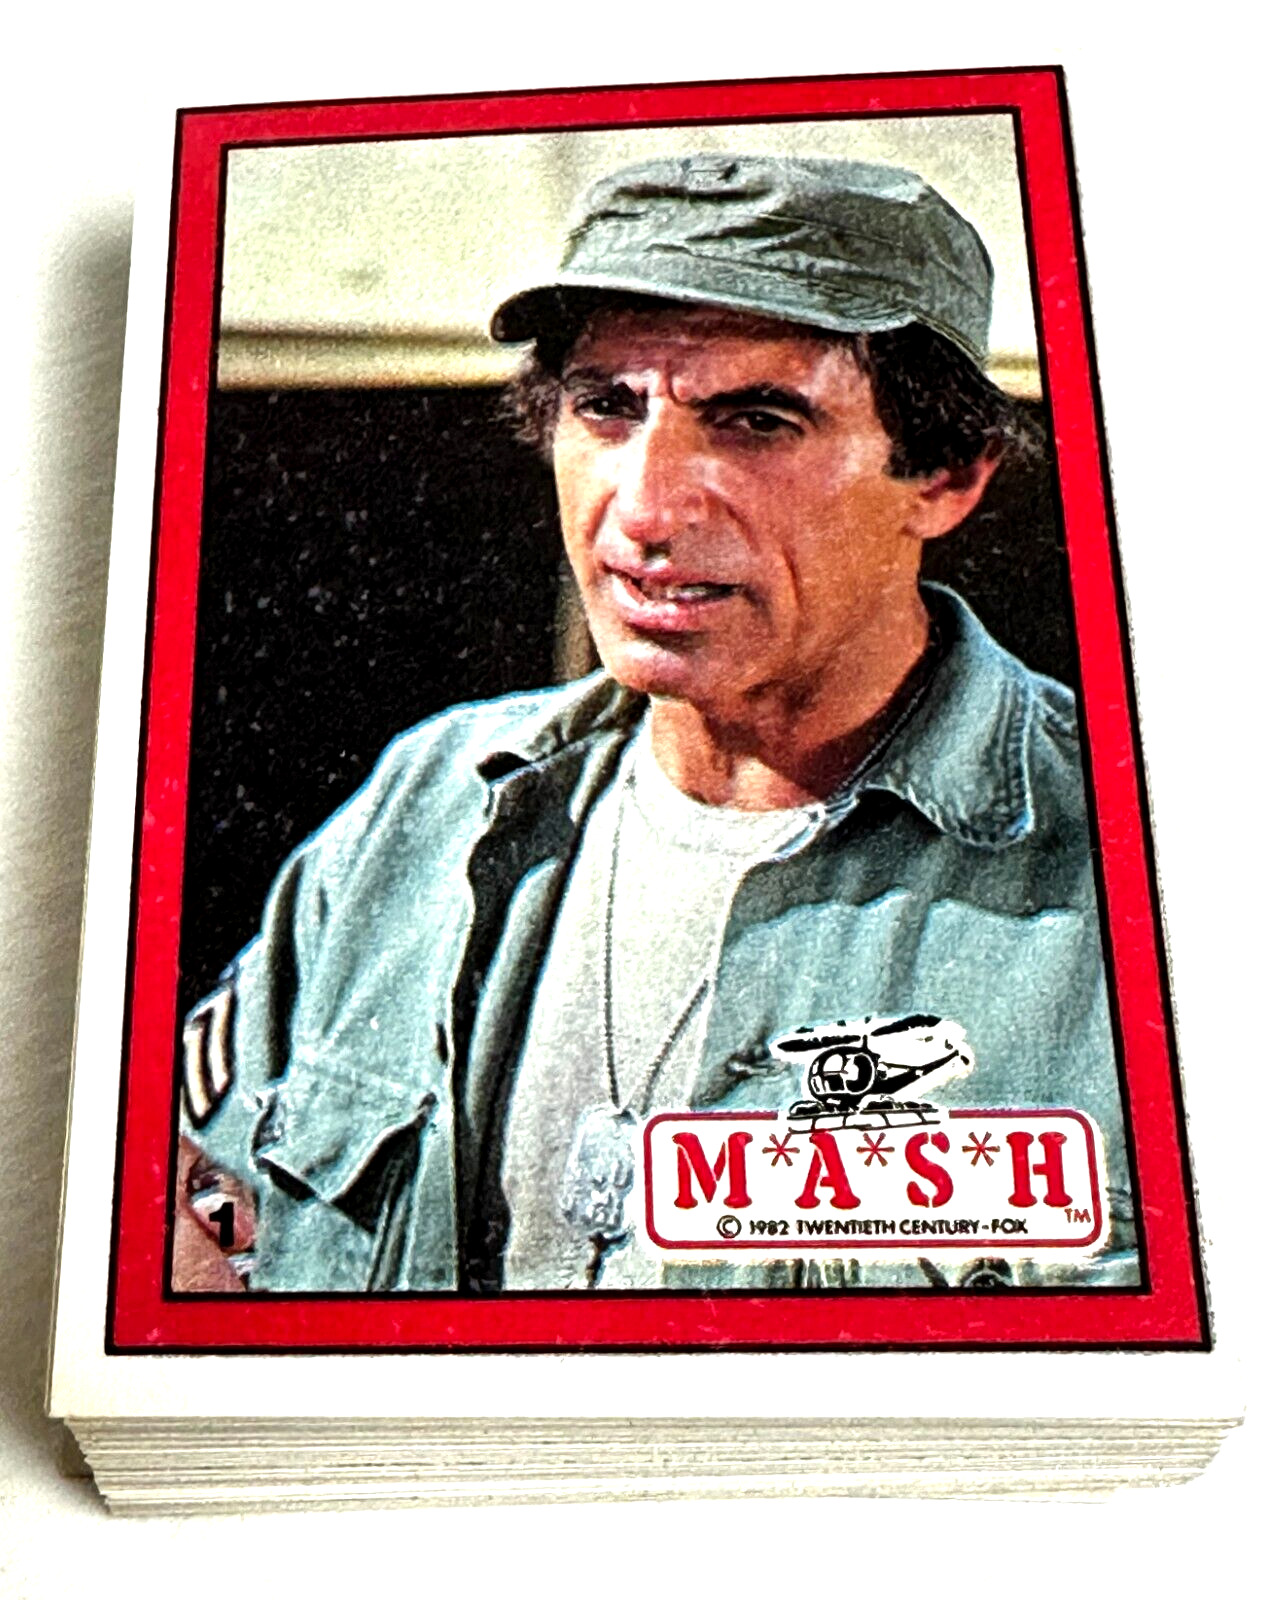 1992 M.A.S.H. (tv series) Complete Trading Card Set 1-66 from Donruss